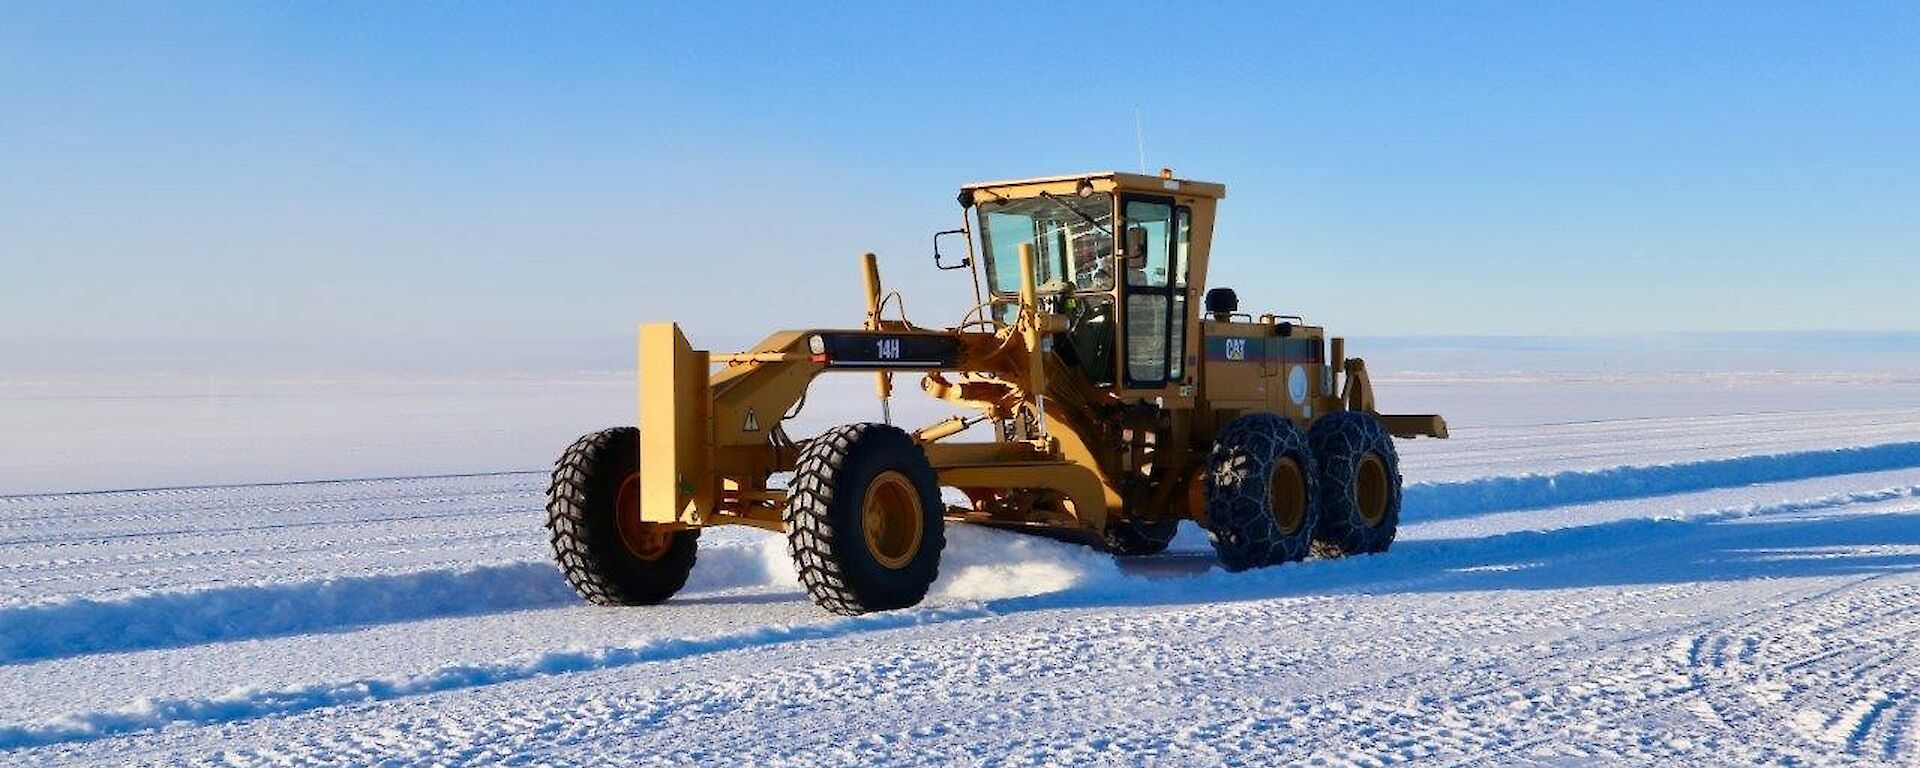 A grader on the ice runway in the construction phase